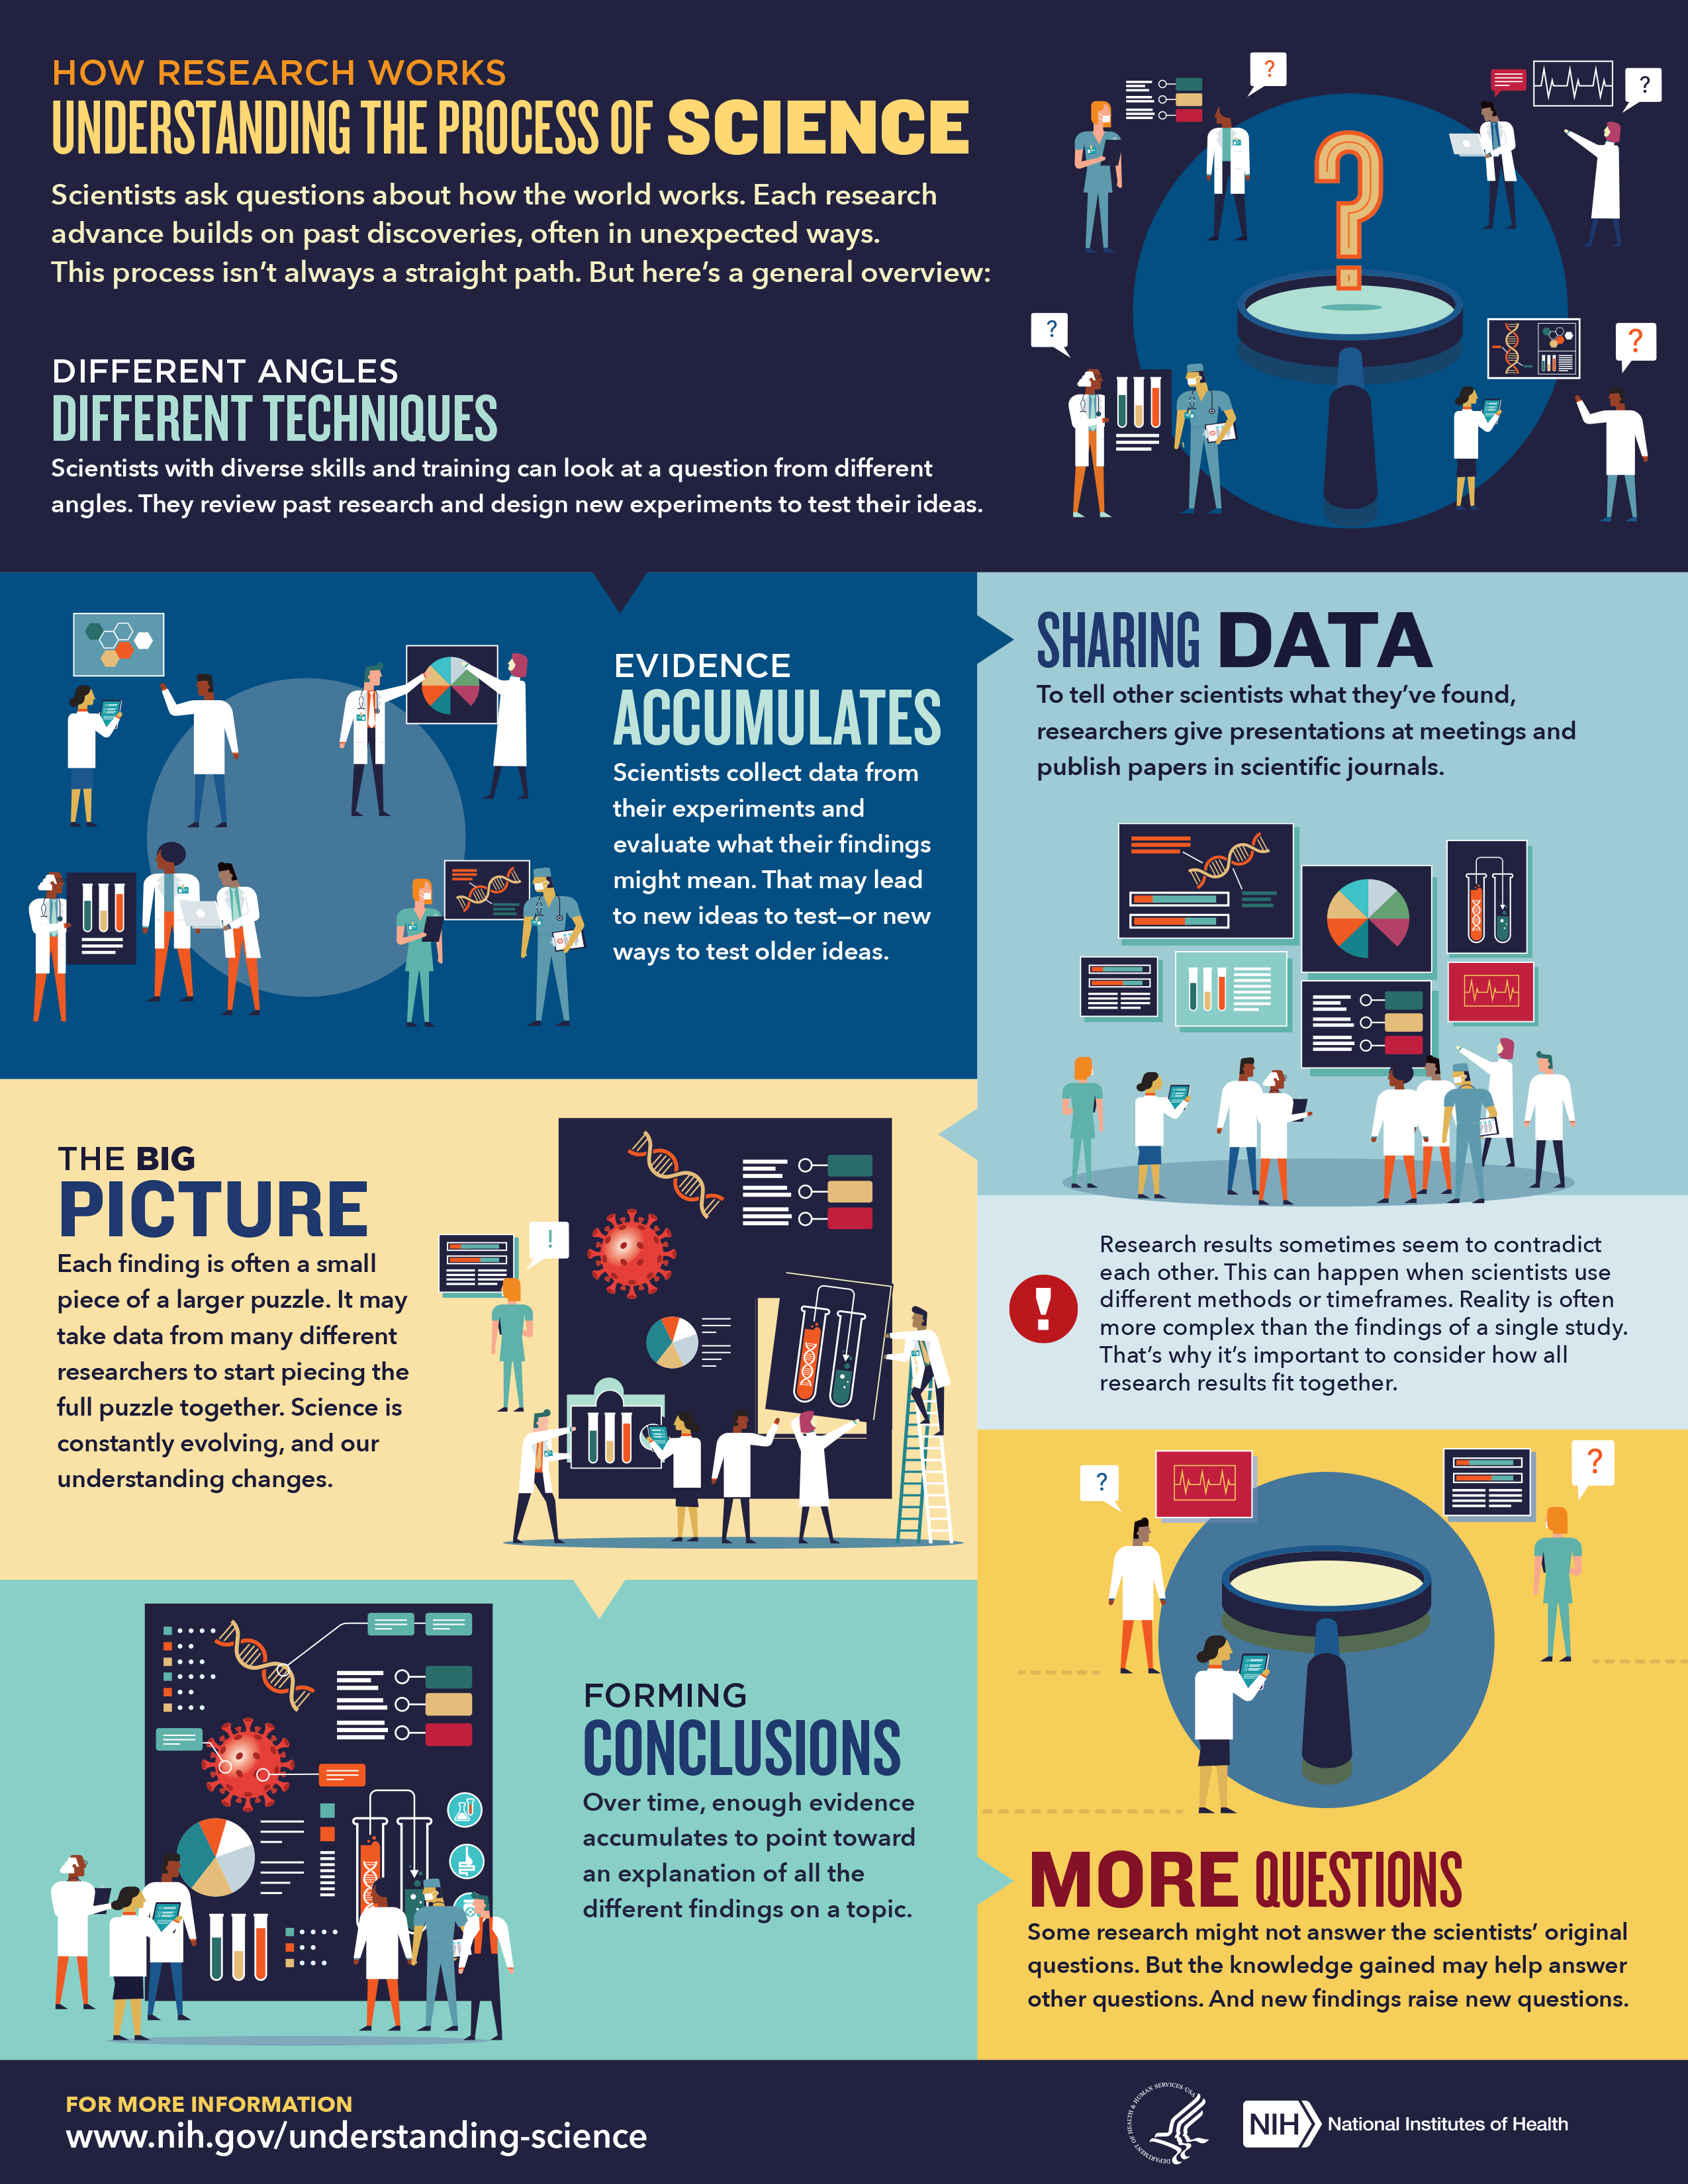 Infographic explaining how research works and understanding the process of science.